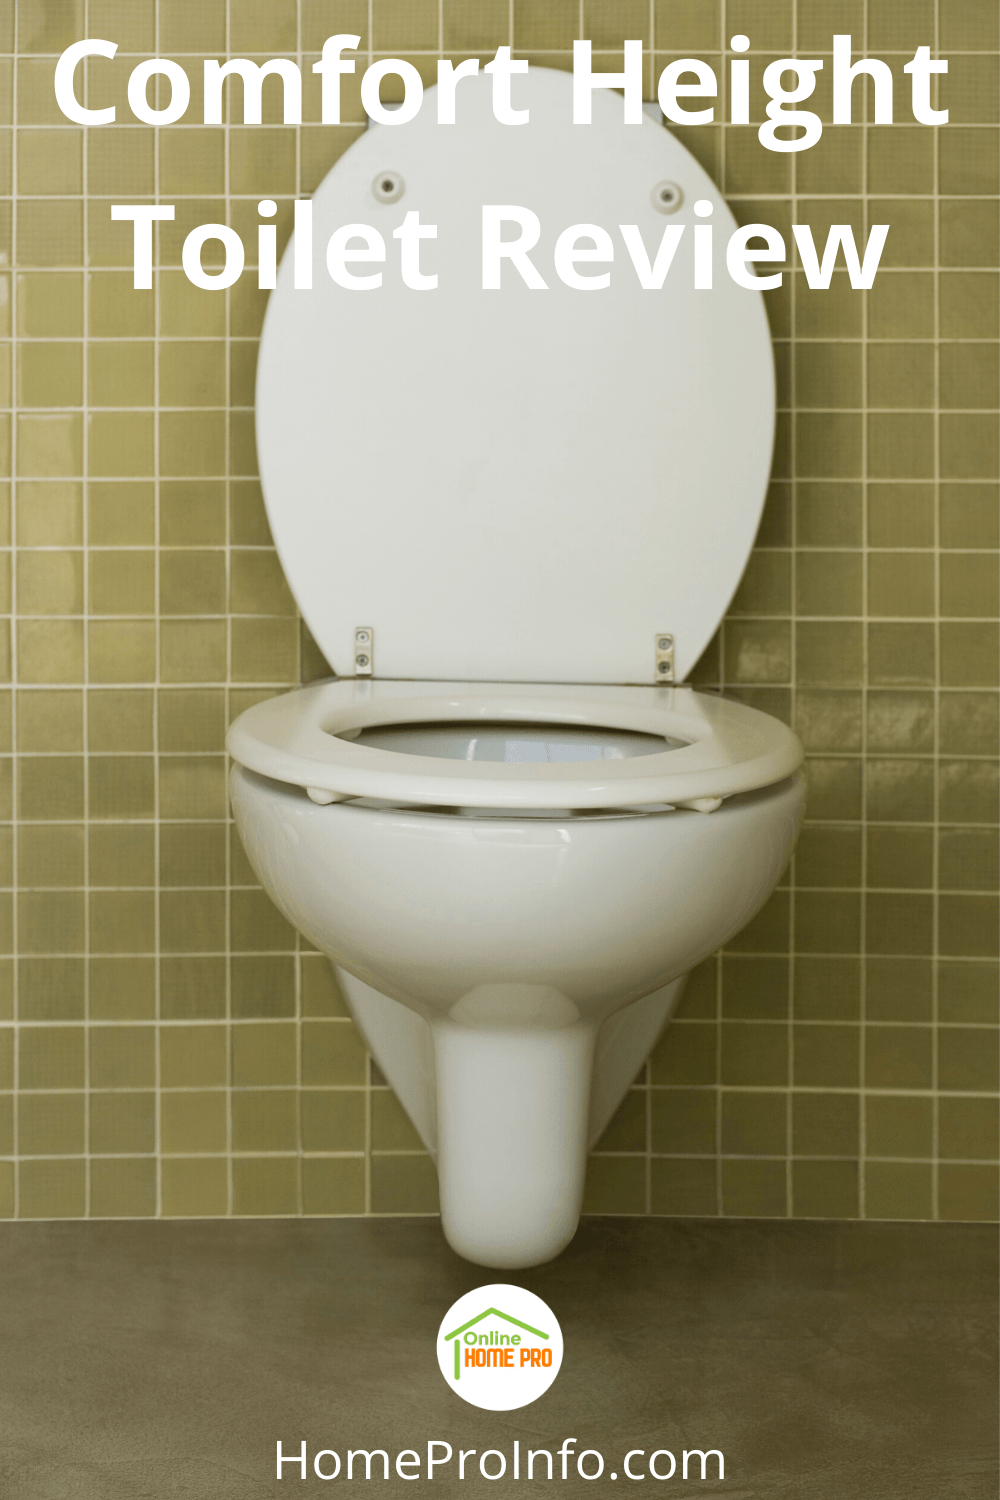 omfort height toilet review